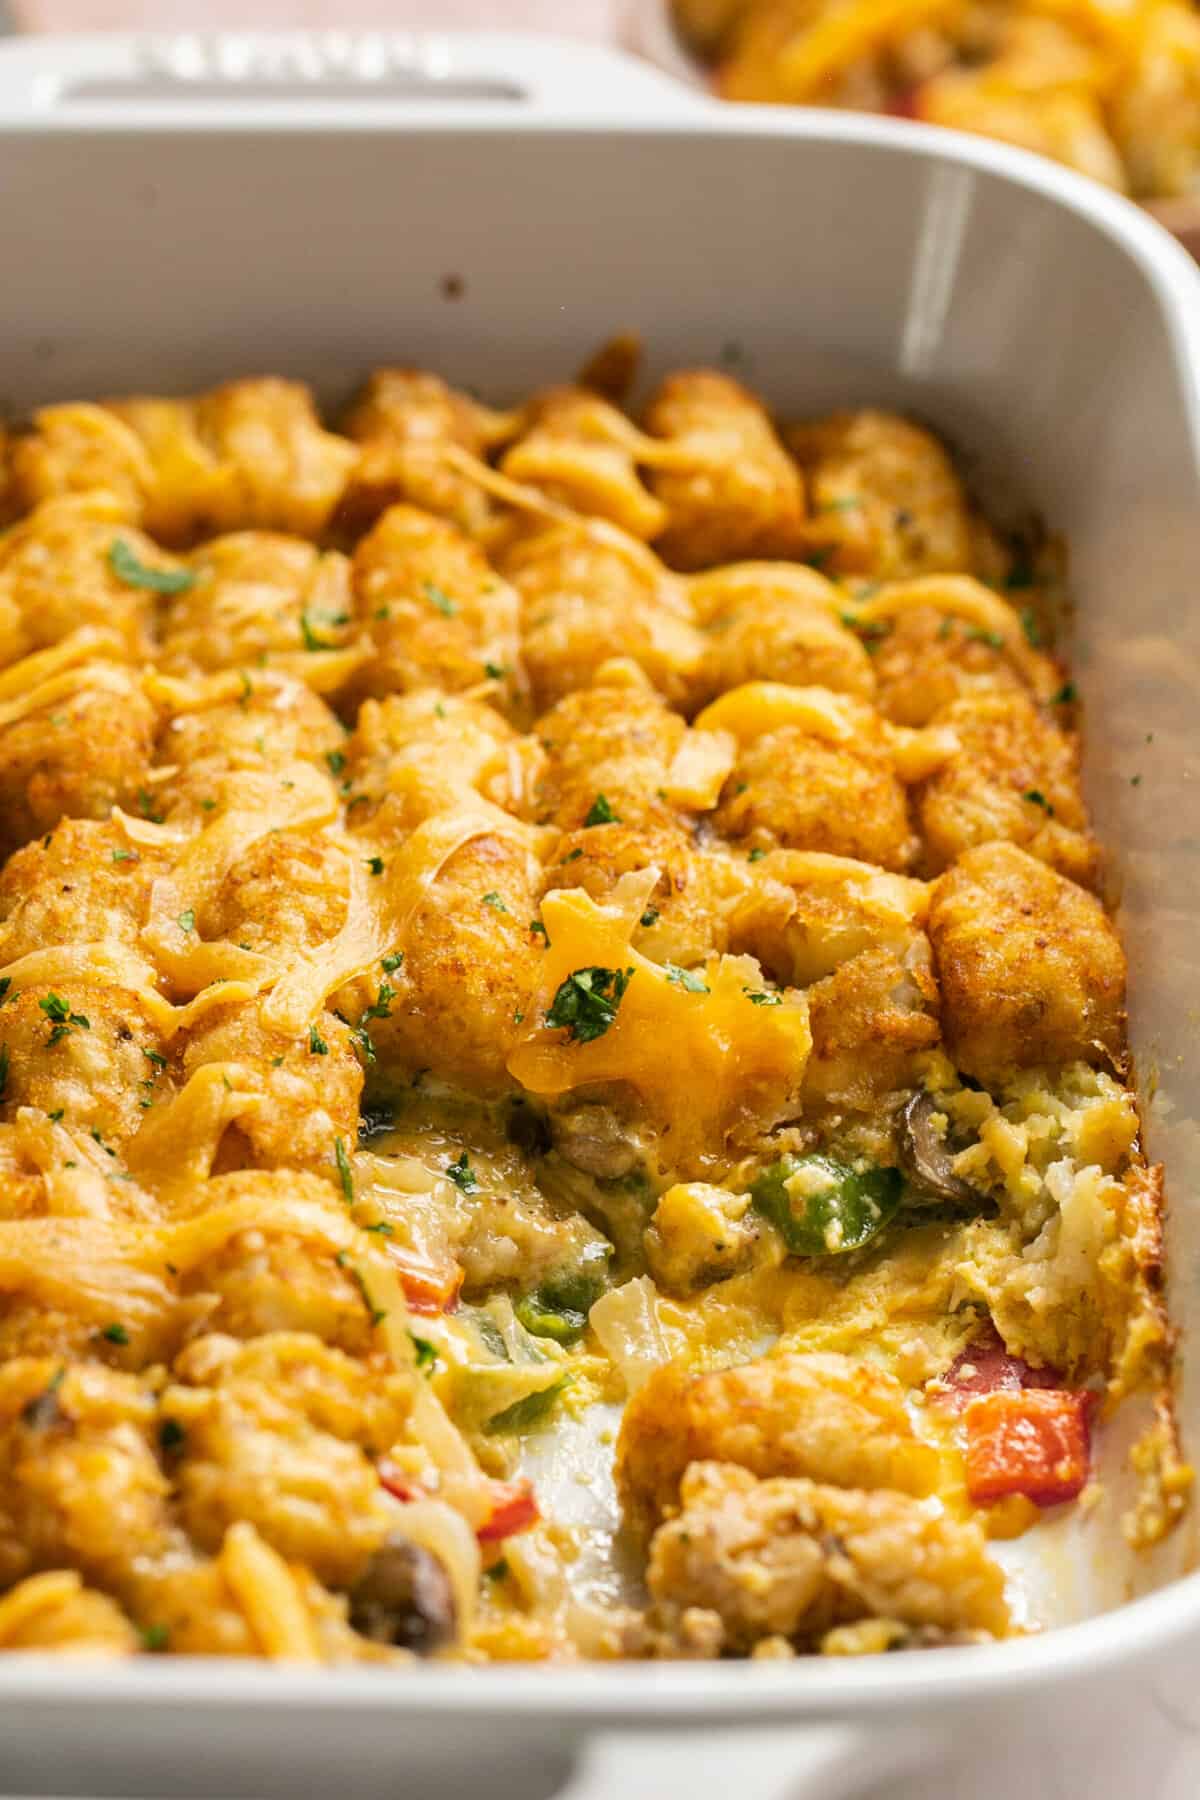 cheesy tater tots with sausage and vegetables in baking dish